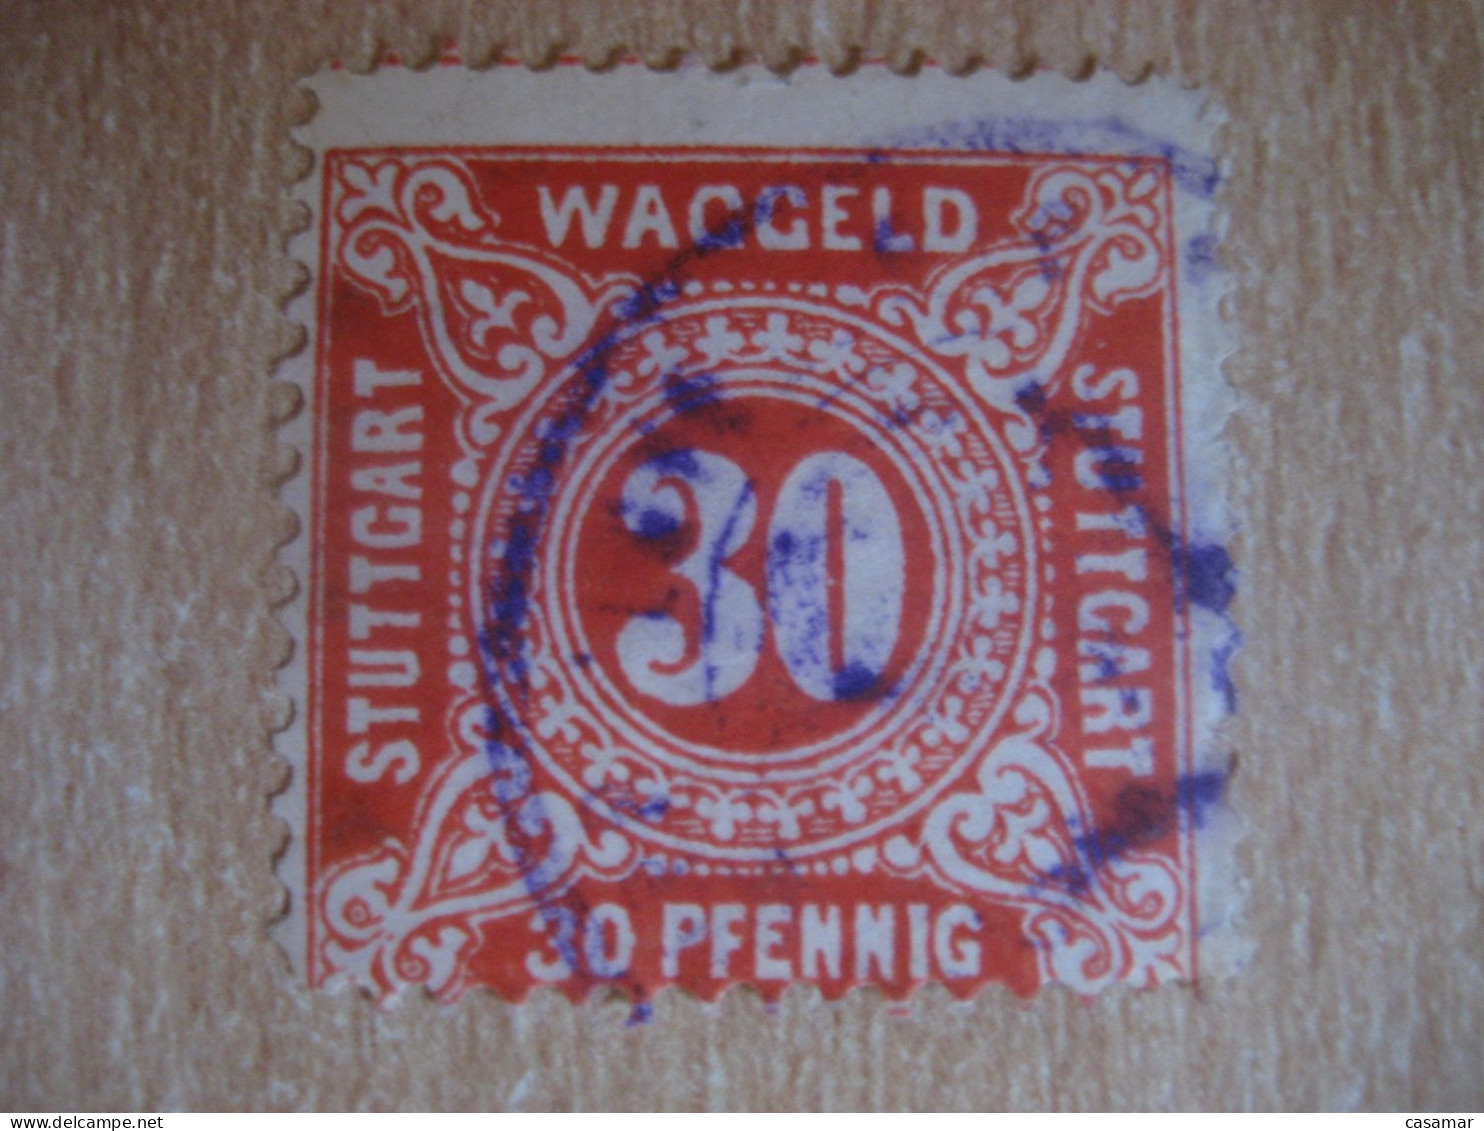 STUTTGART Waggeld 30 Pf Orange Red Local Revenue Fiscal Privat Stamp GERMANY - Private & Lokale Post